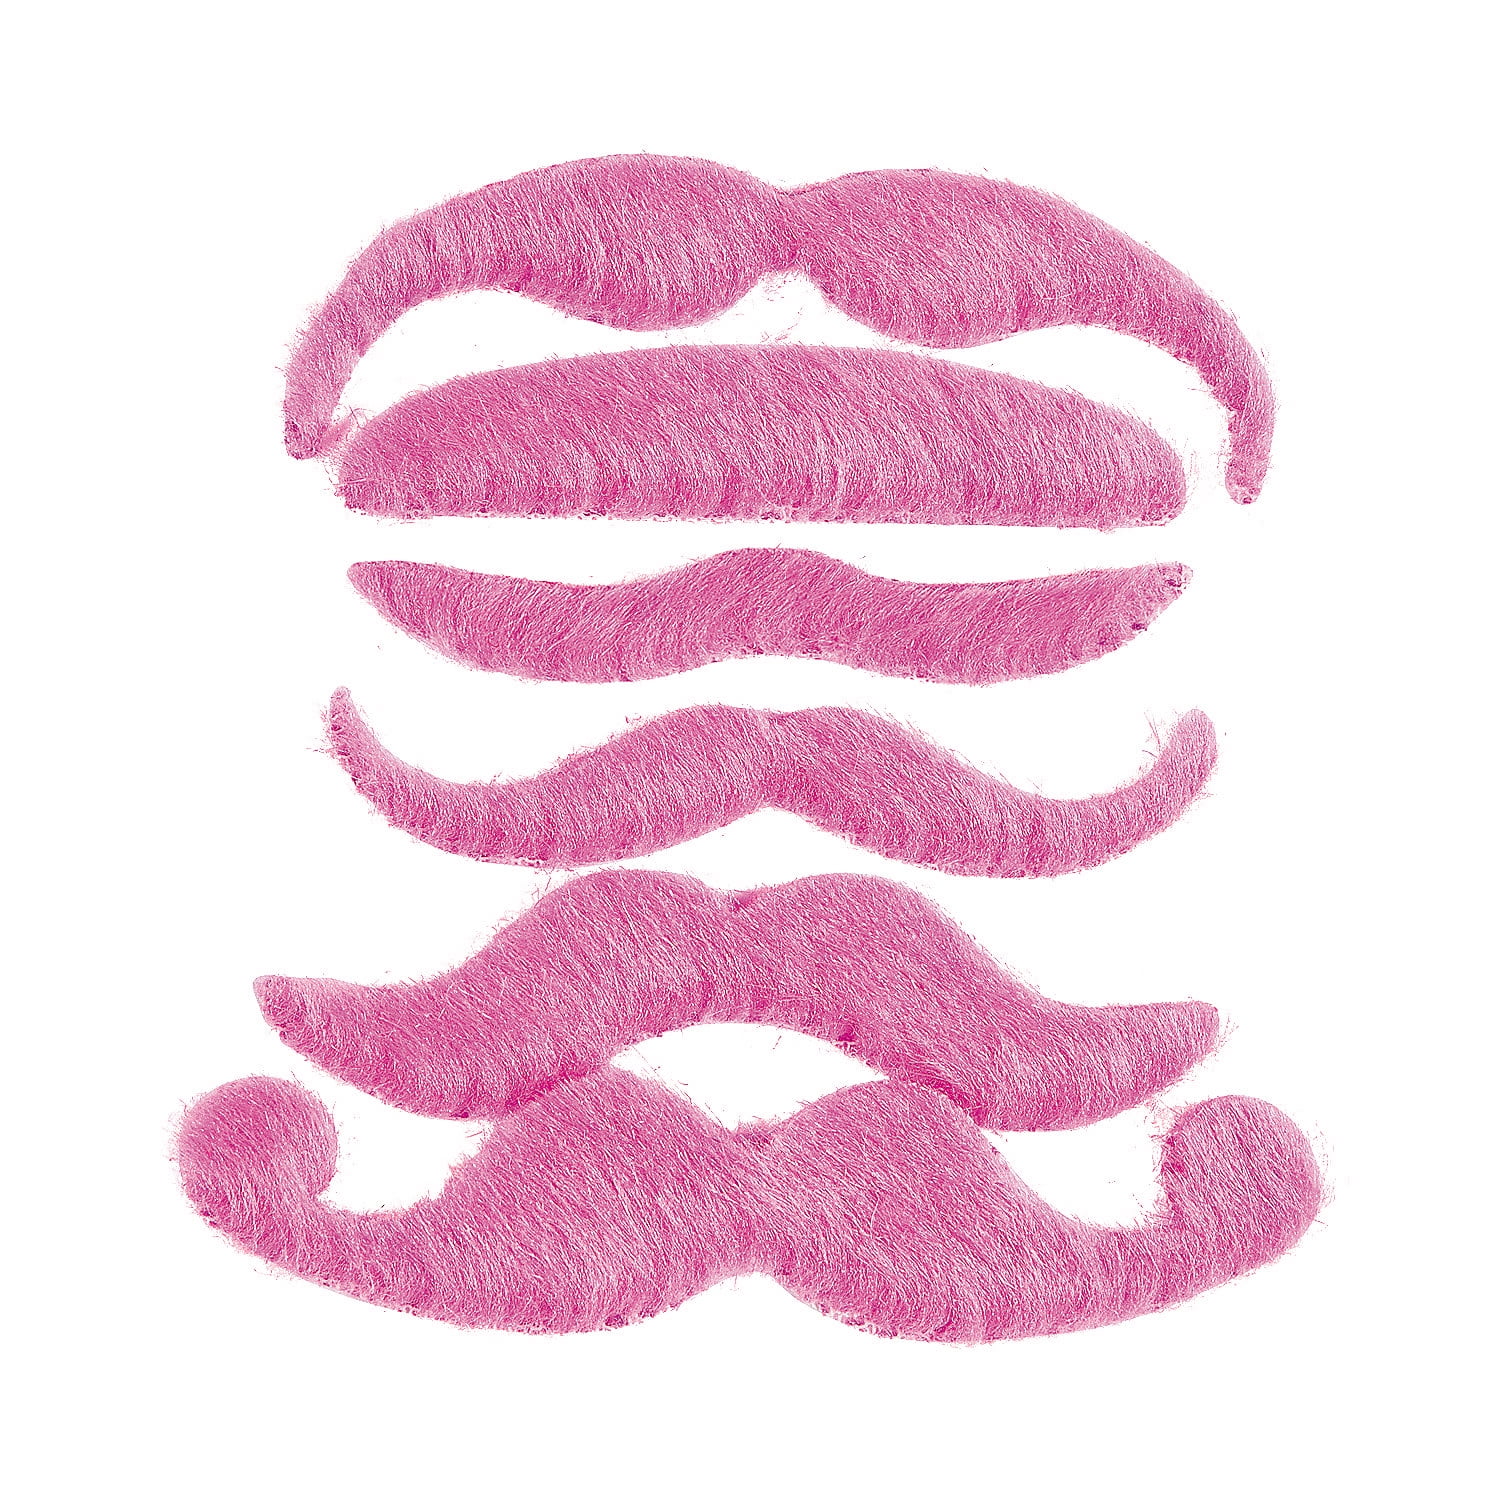 12 MUSTACHE PAPER NAPKIN RINGS HOLDERS MOVEMBER PARTY TABLE DECORATION MOUSTACHE